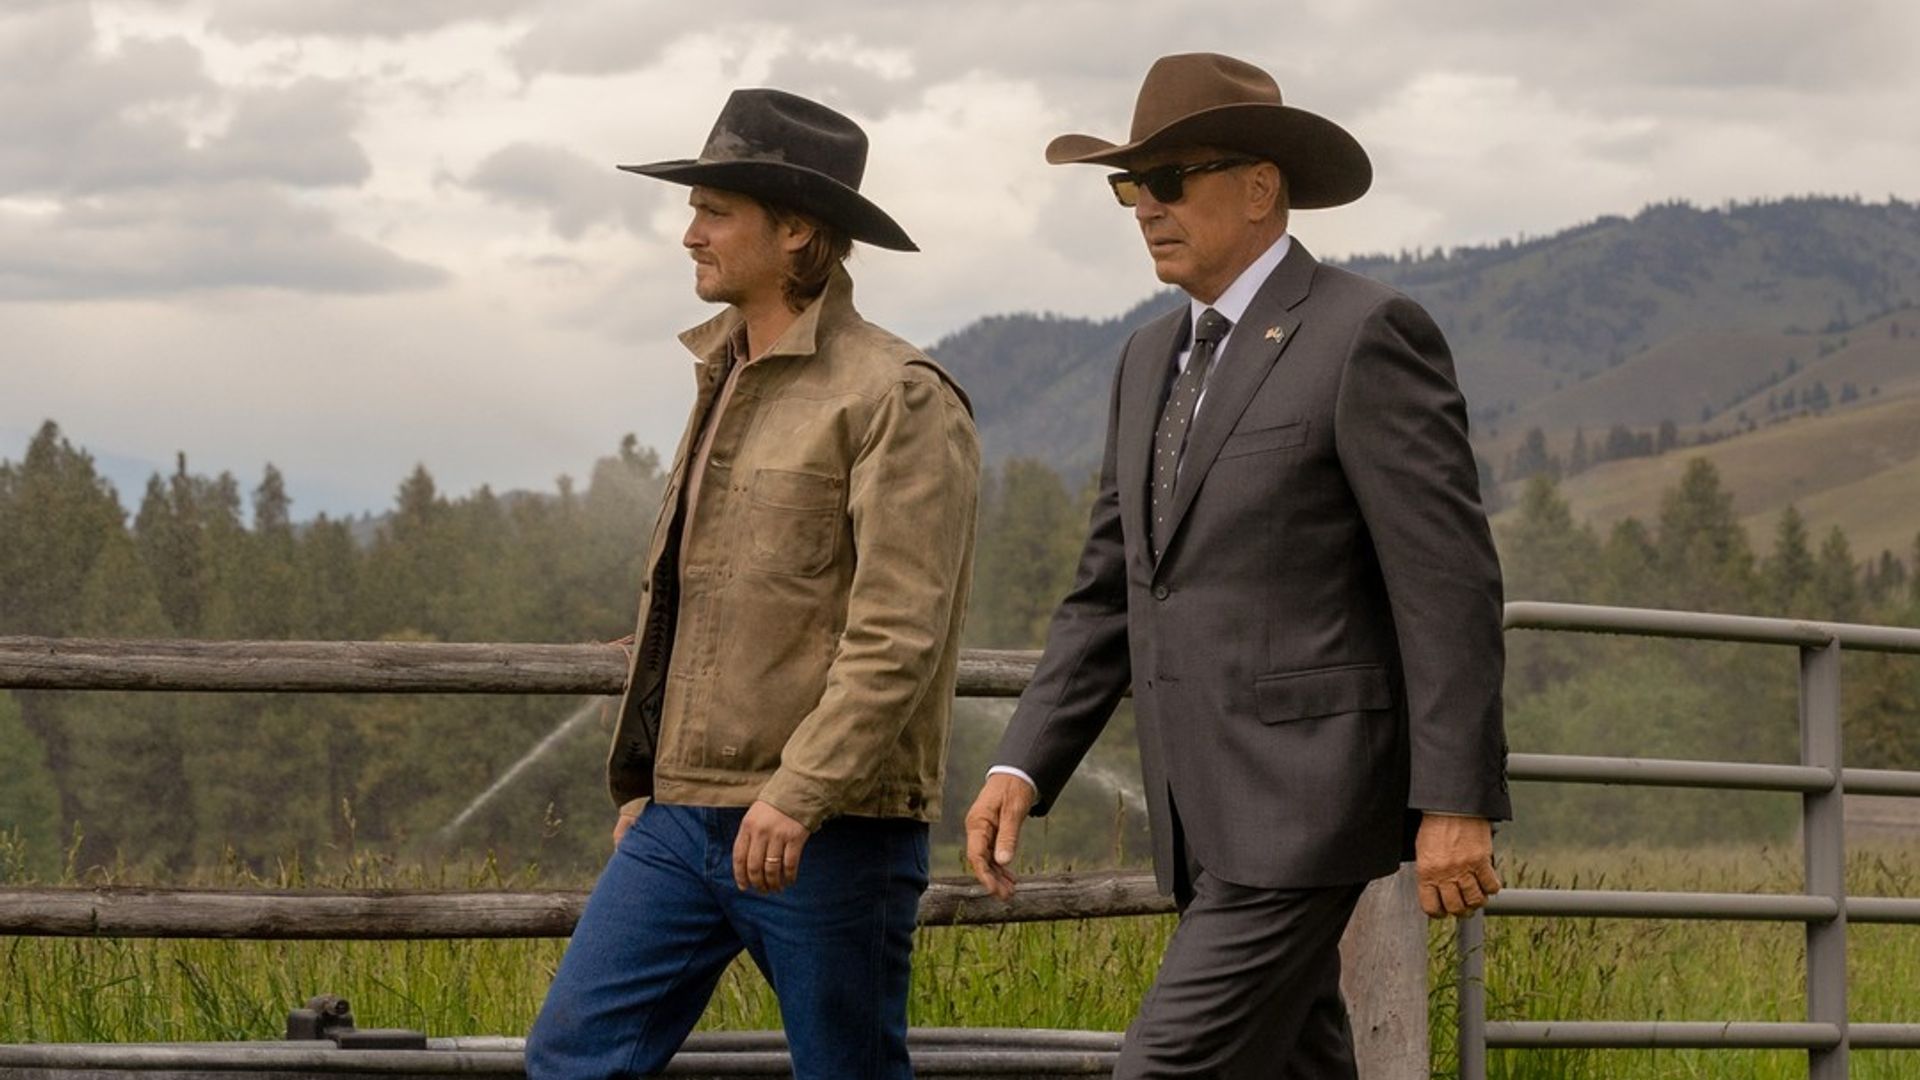 Kevin Costner in character as John Dutton in Yellowstone